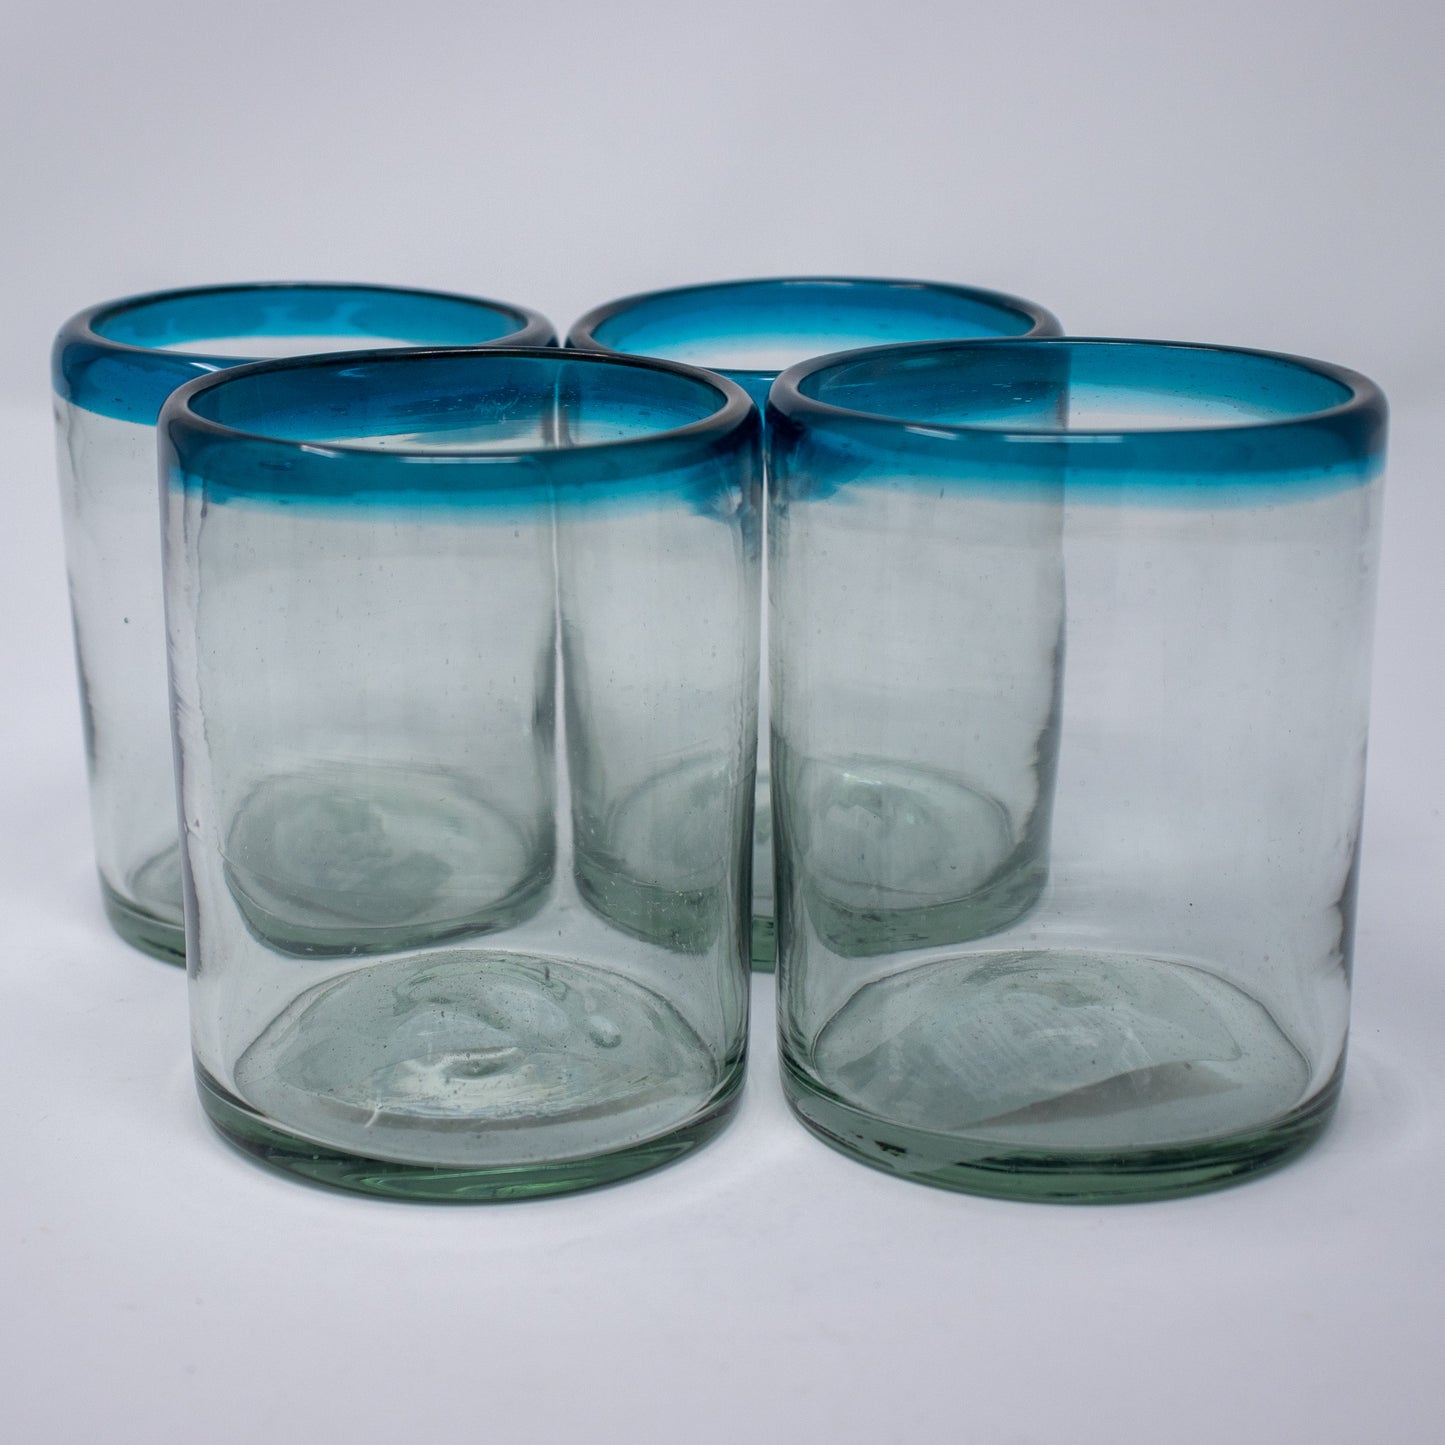 Small Mexican Blue Rim Tumblers (Set of 4)